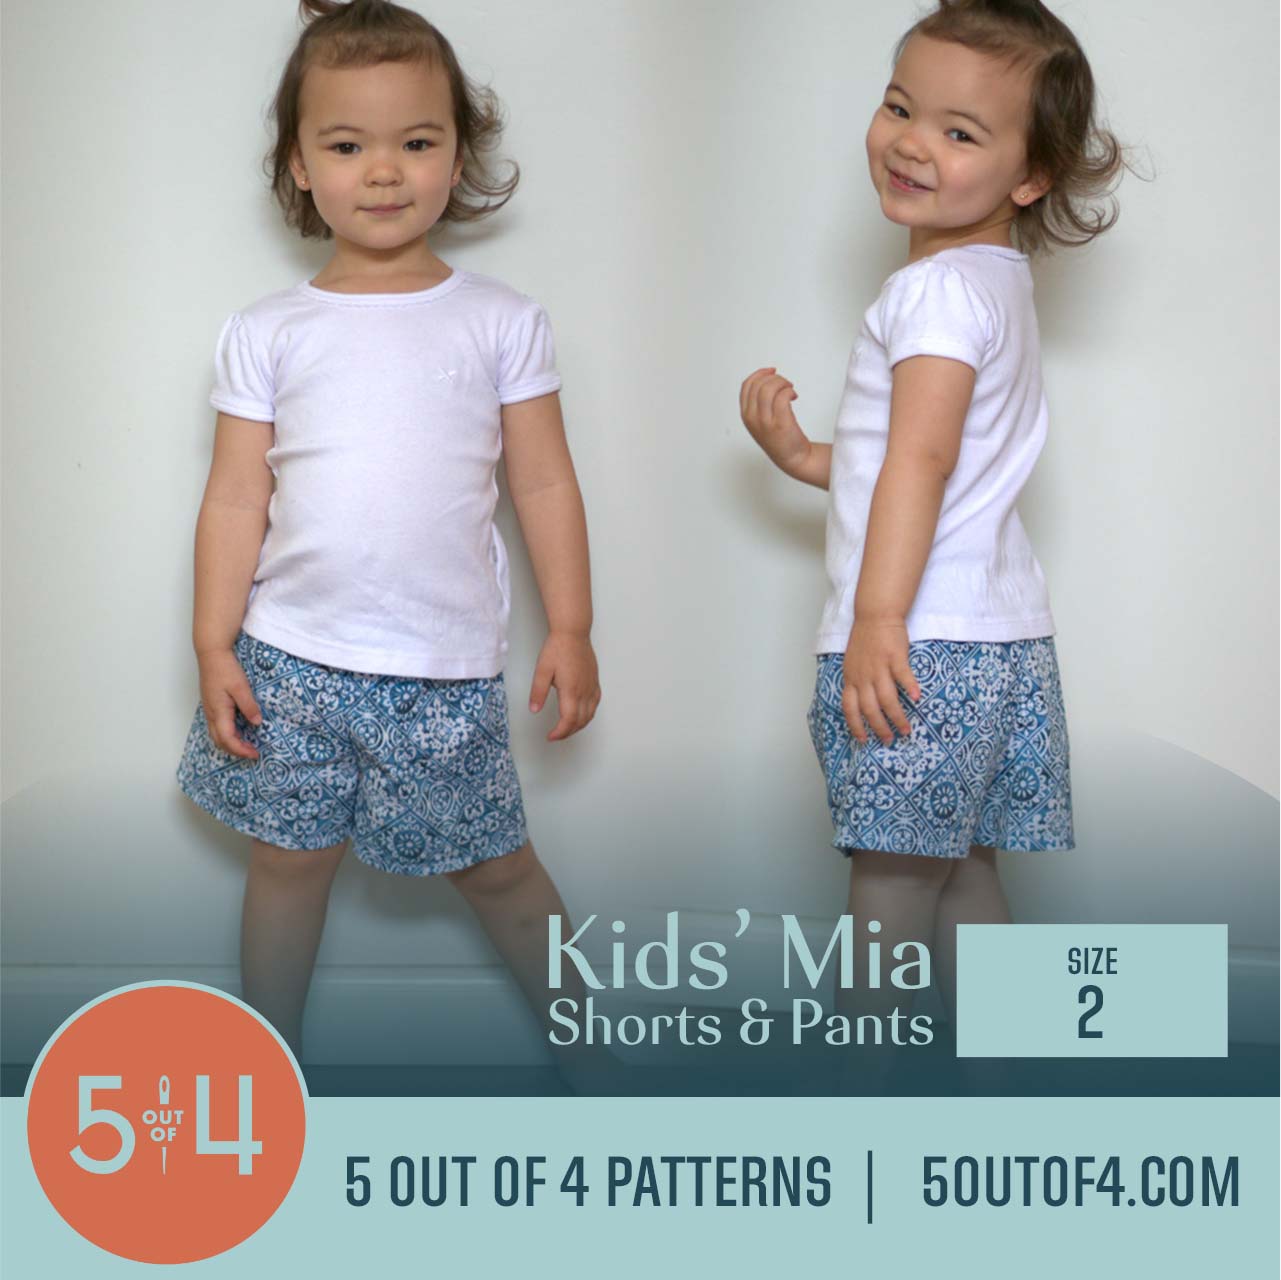 Sewing patterns for kids | Wardrobe By Me - We love sewing!